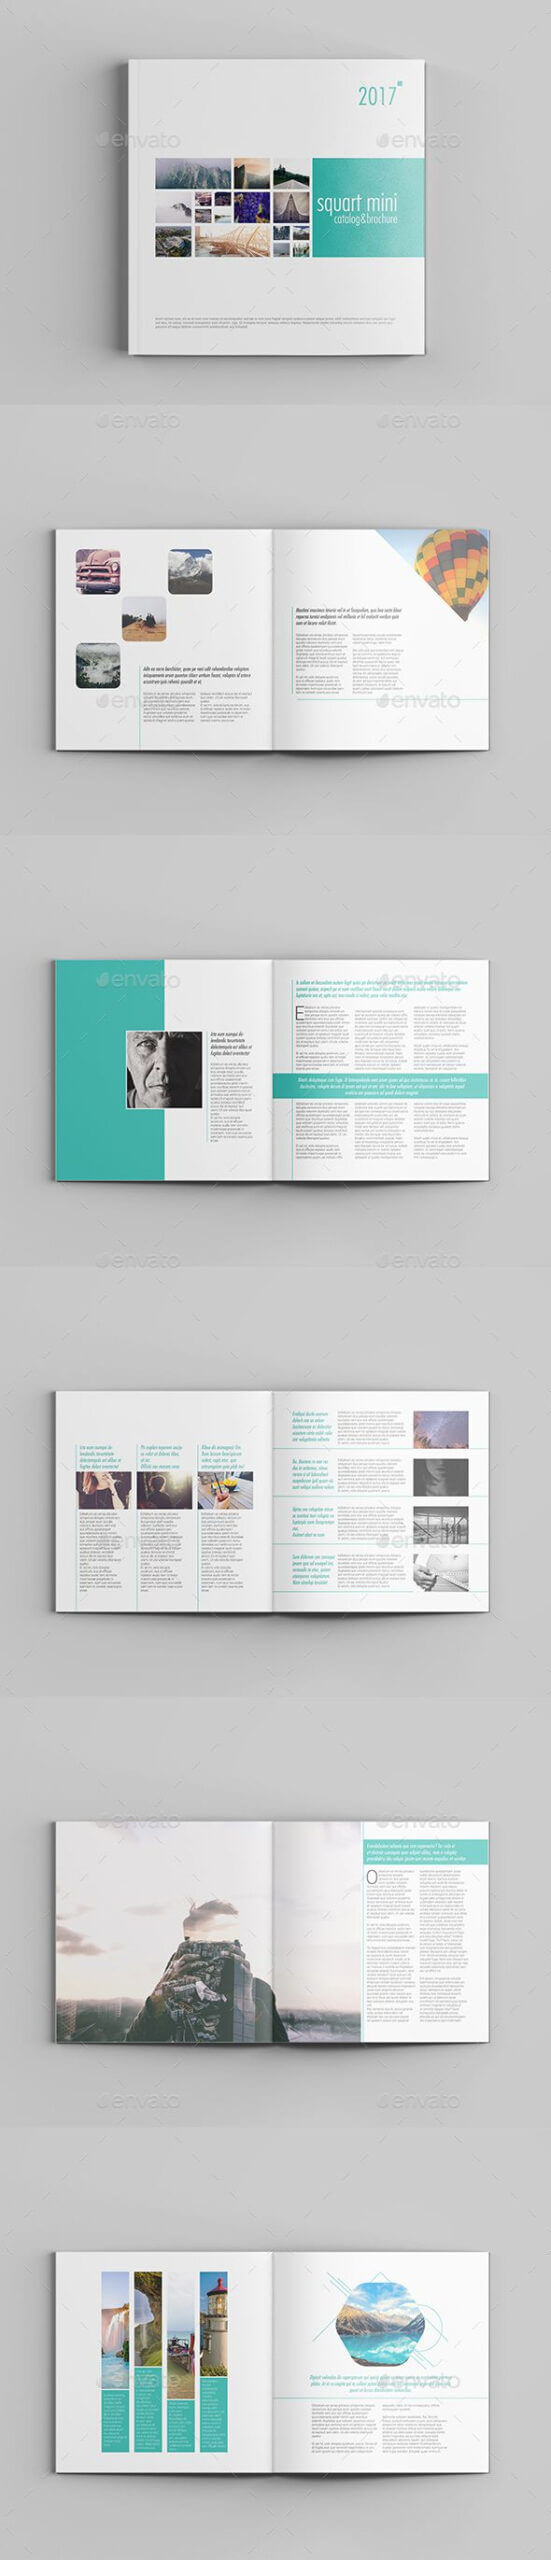 Pincool Design On Brochure Design | Booklet Design, Book Throughout 12 Page Brochure Template